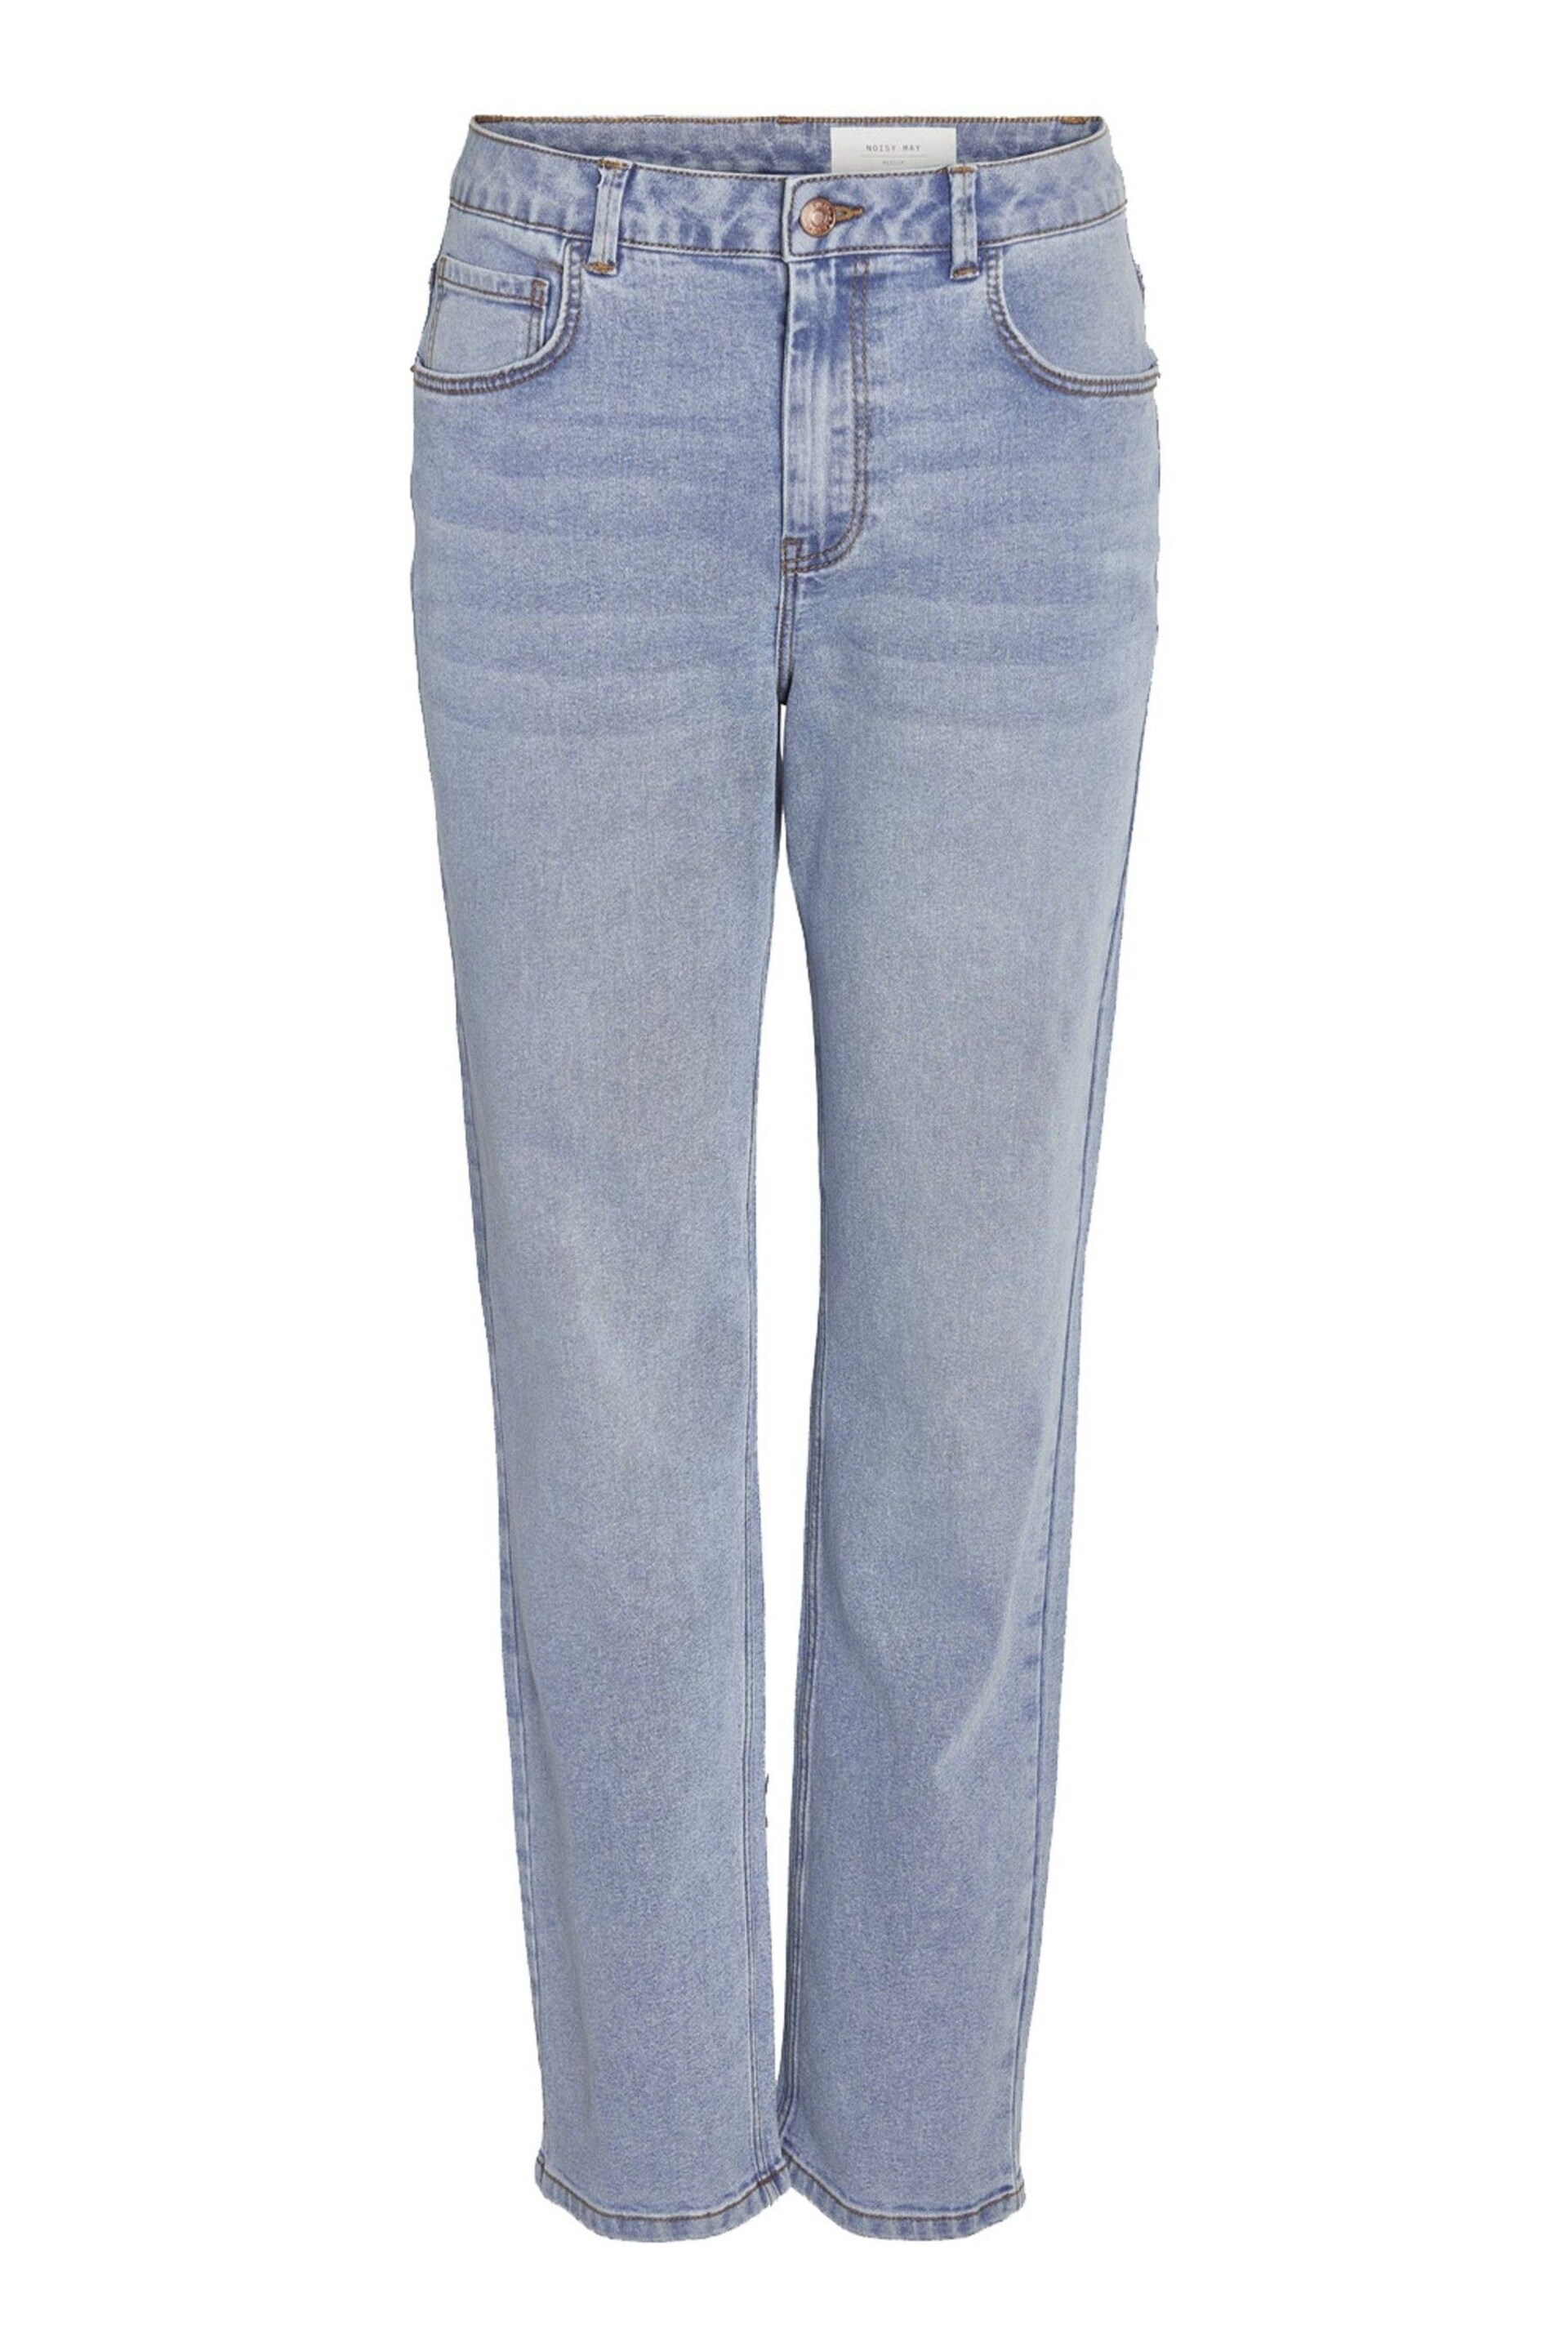 NOISY MAY Blue High Waisted Straight Leg Jeans - Image 7 of 8